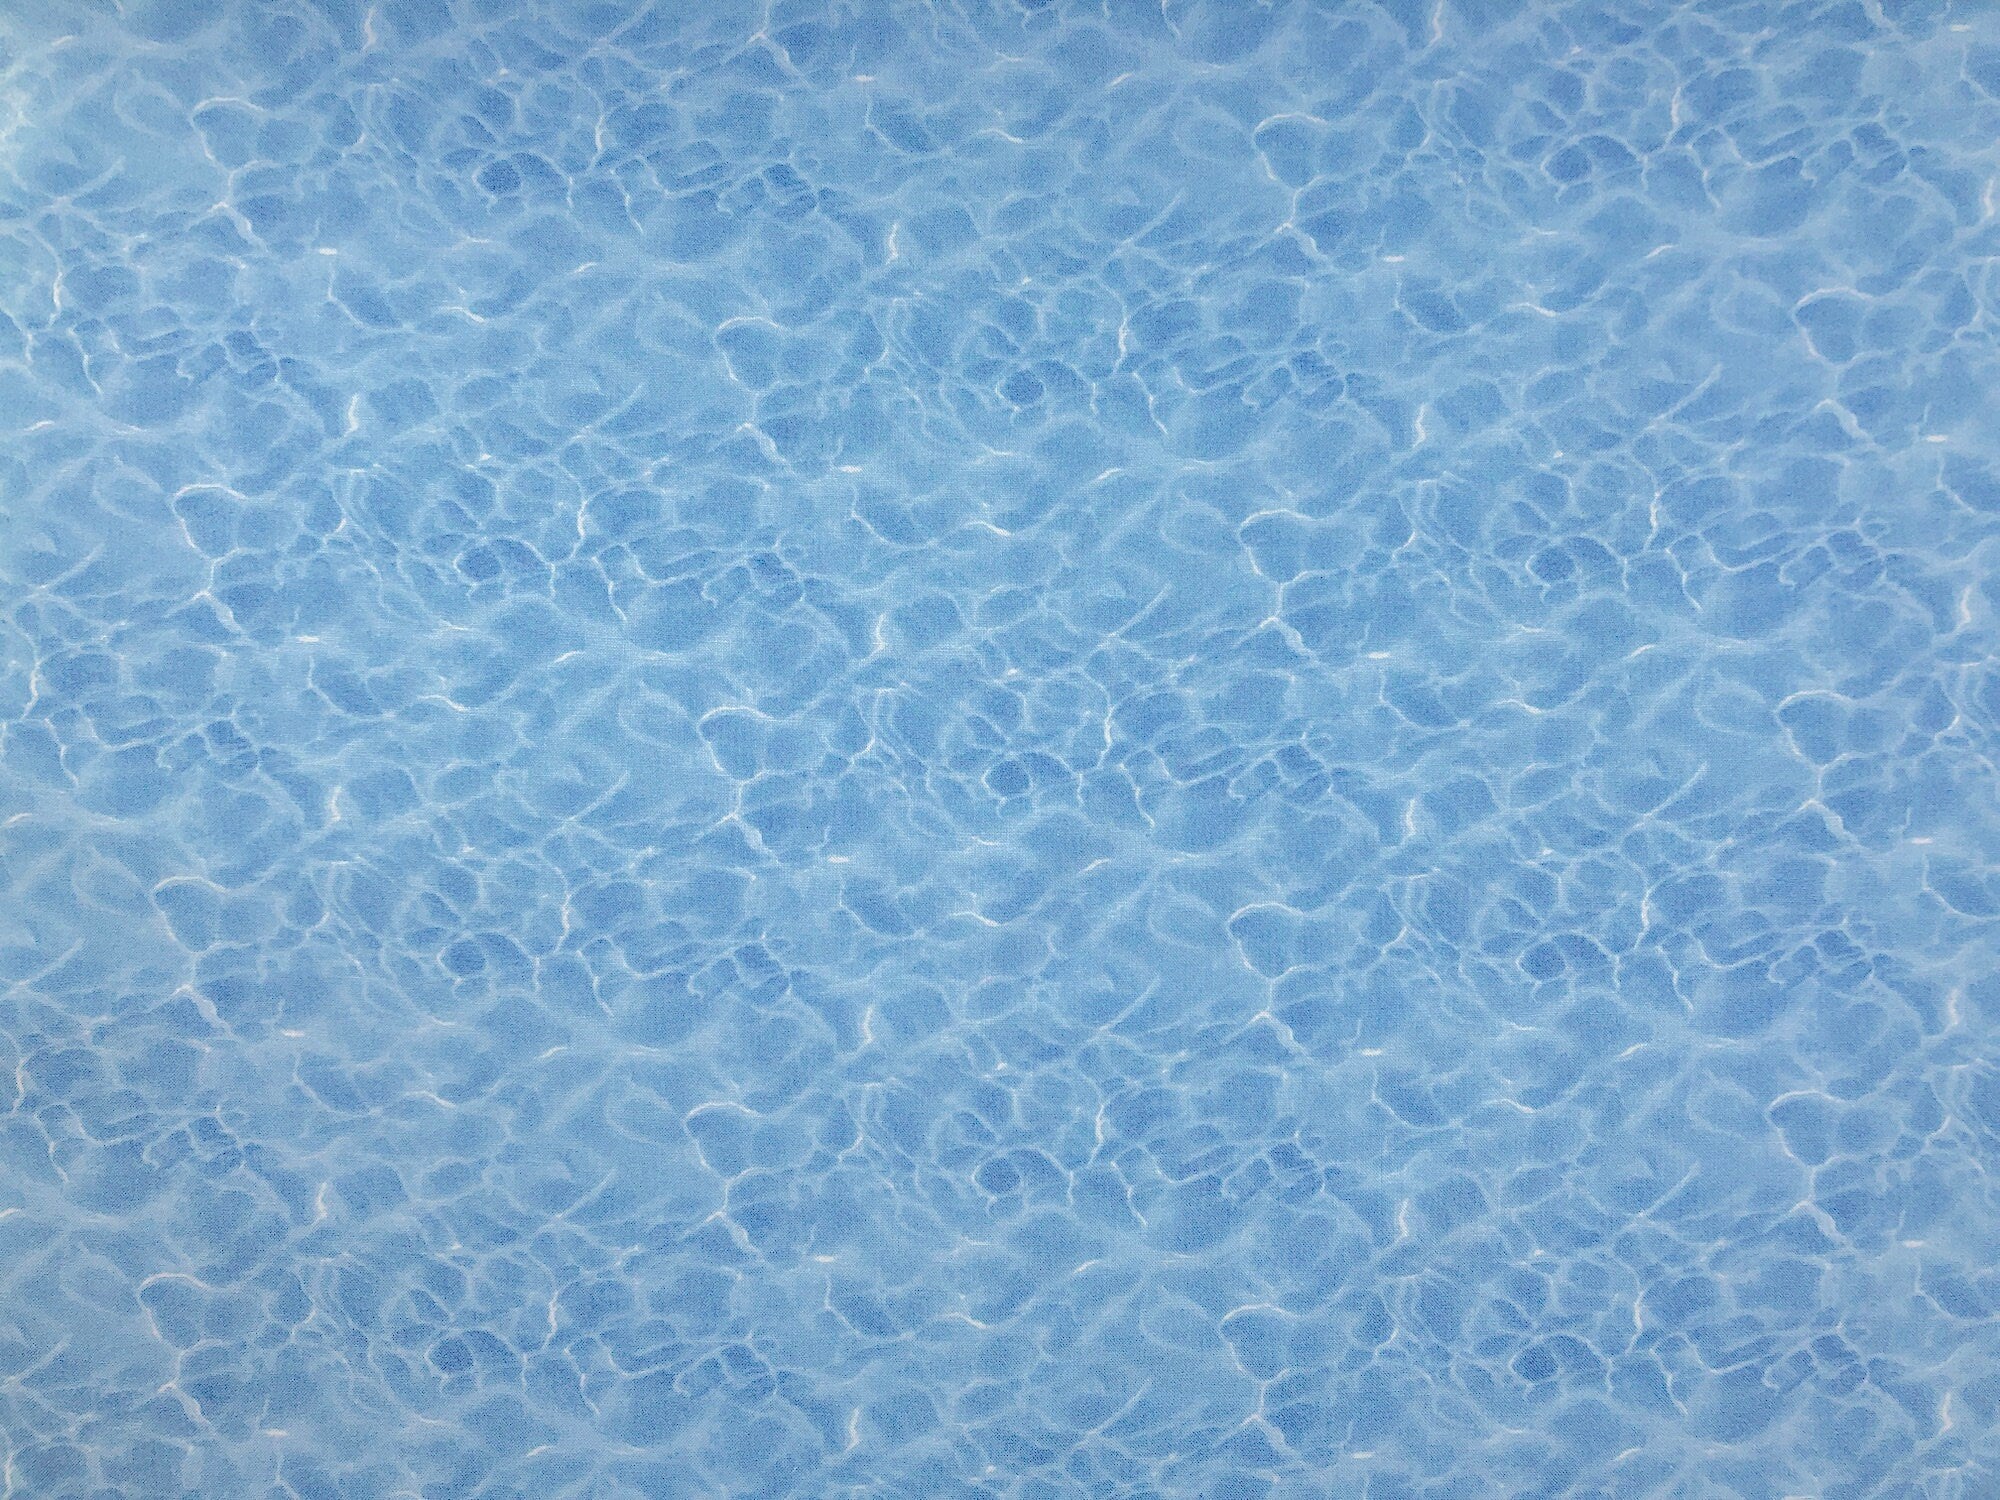 This fabric is as if you are looking into a swimming pool. This cotton fabric is blue and white.